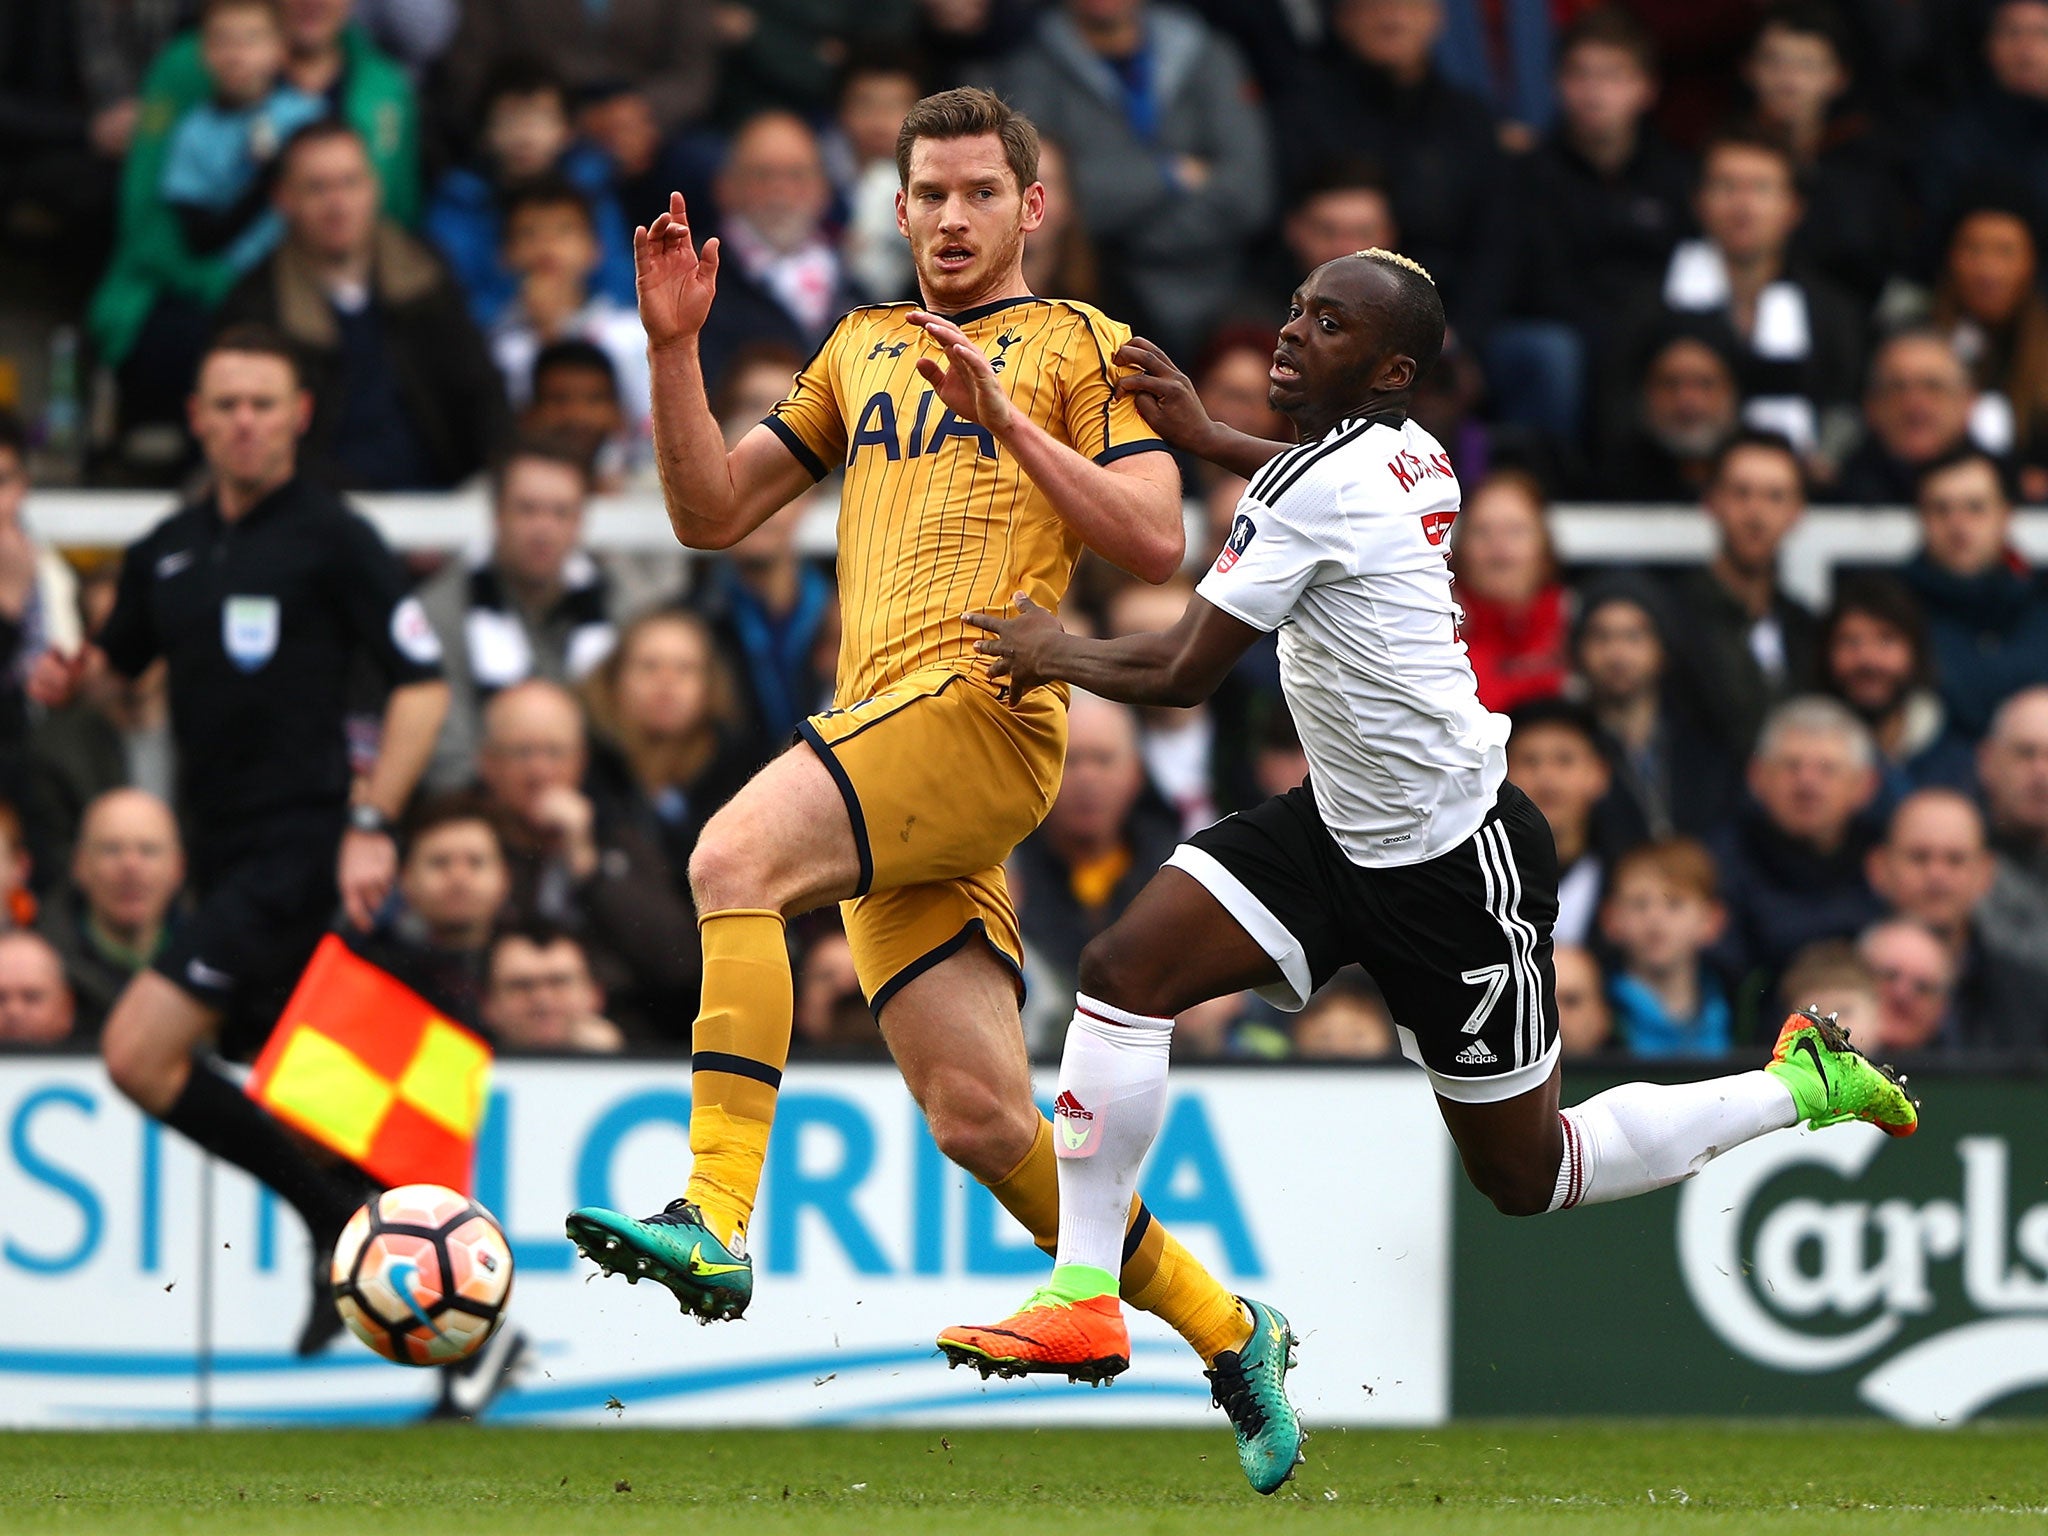 Jan Vertonghen made his return from injury during Tottenham's FA Cup victory over Fulham